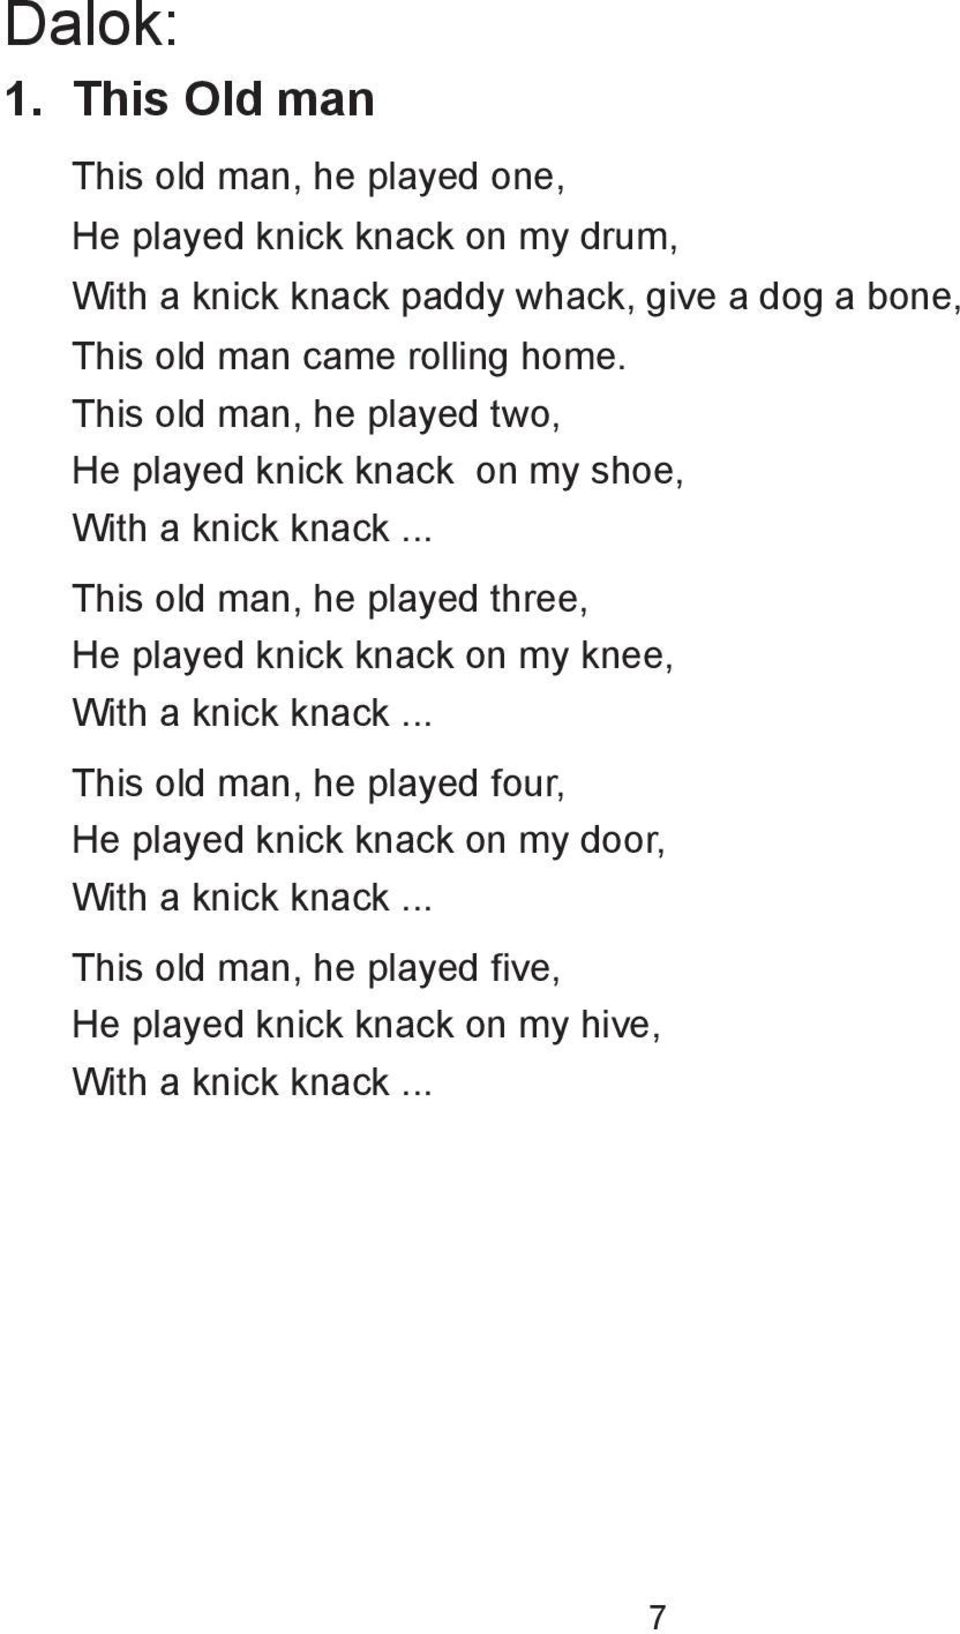 This old man came rolling home. This old man, he played two, He played knick knack on my shoe, With a knick knack.